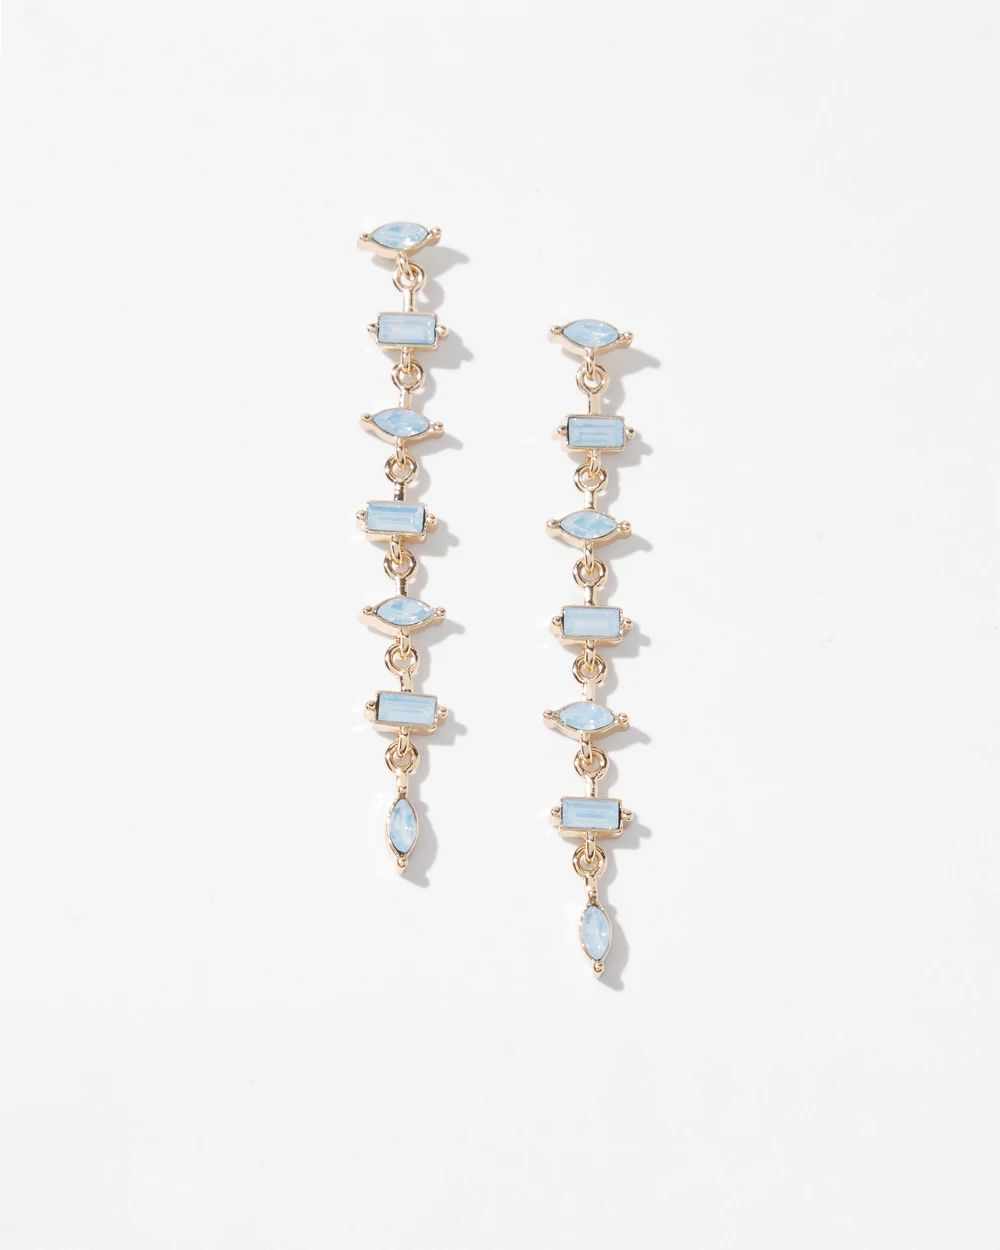 Gold + Blue Baguette Linear Earrings click to view larger image.